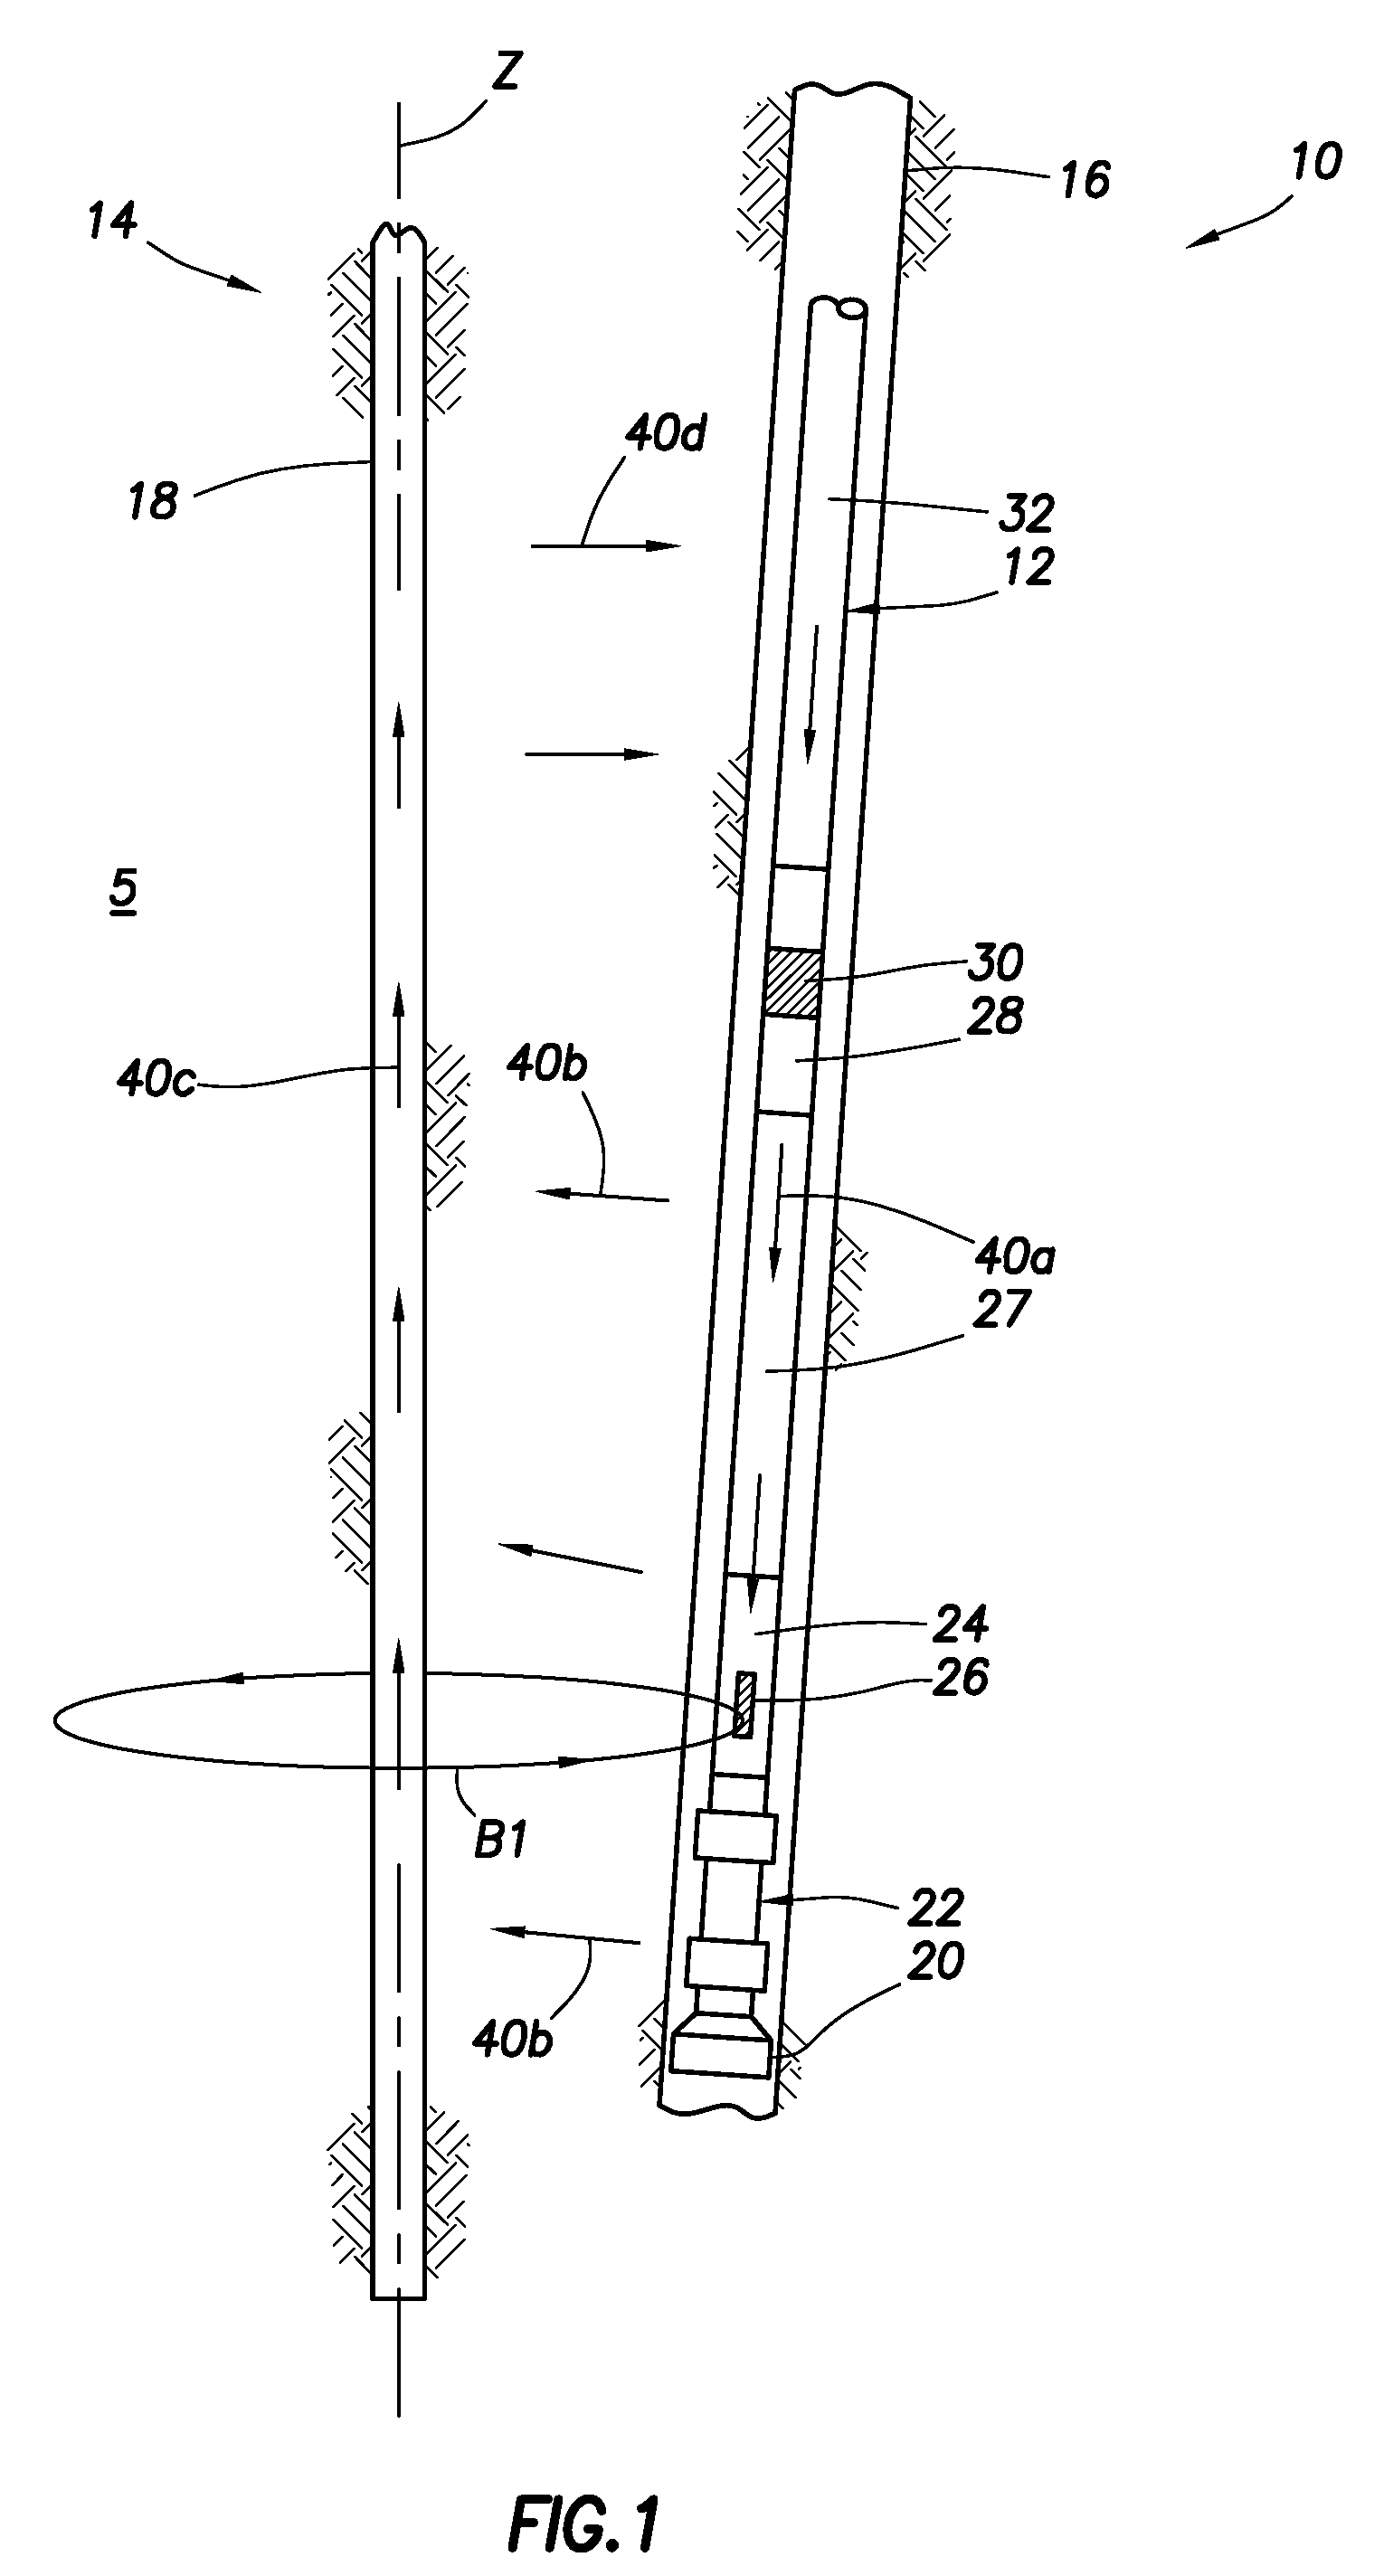 Method and apparatus for locating well casings from an adjacent wellbore